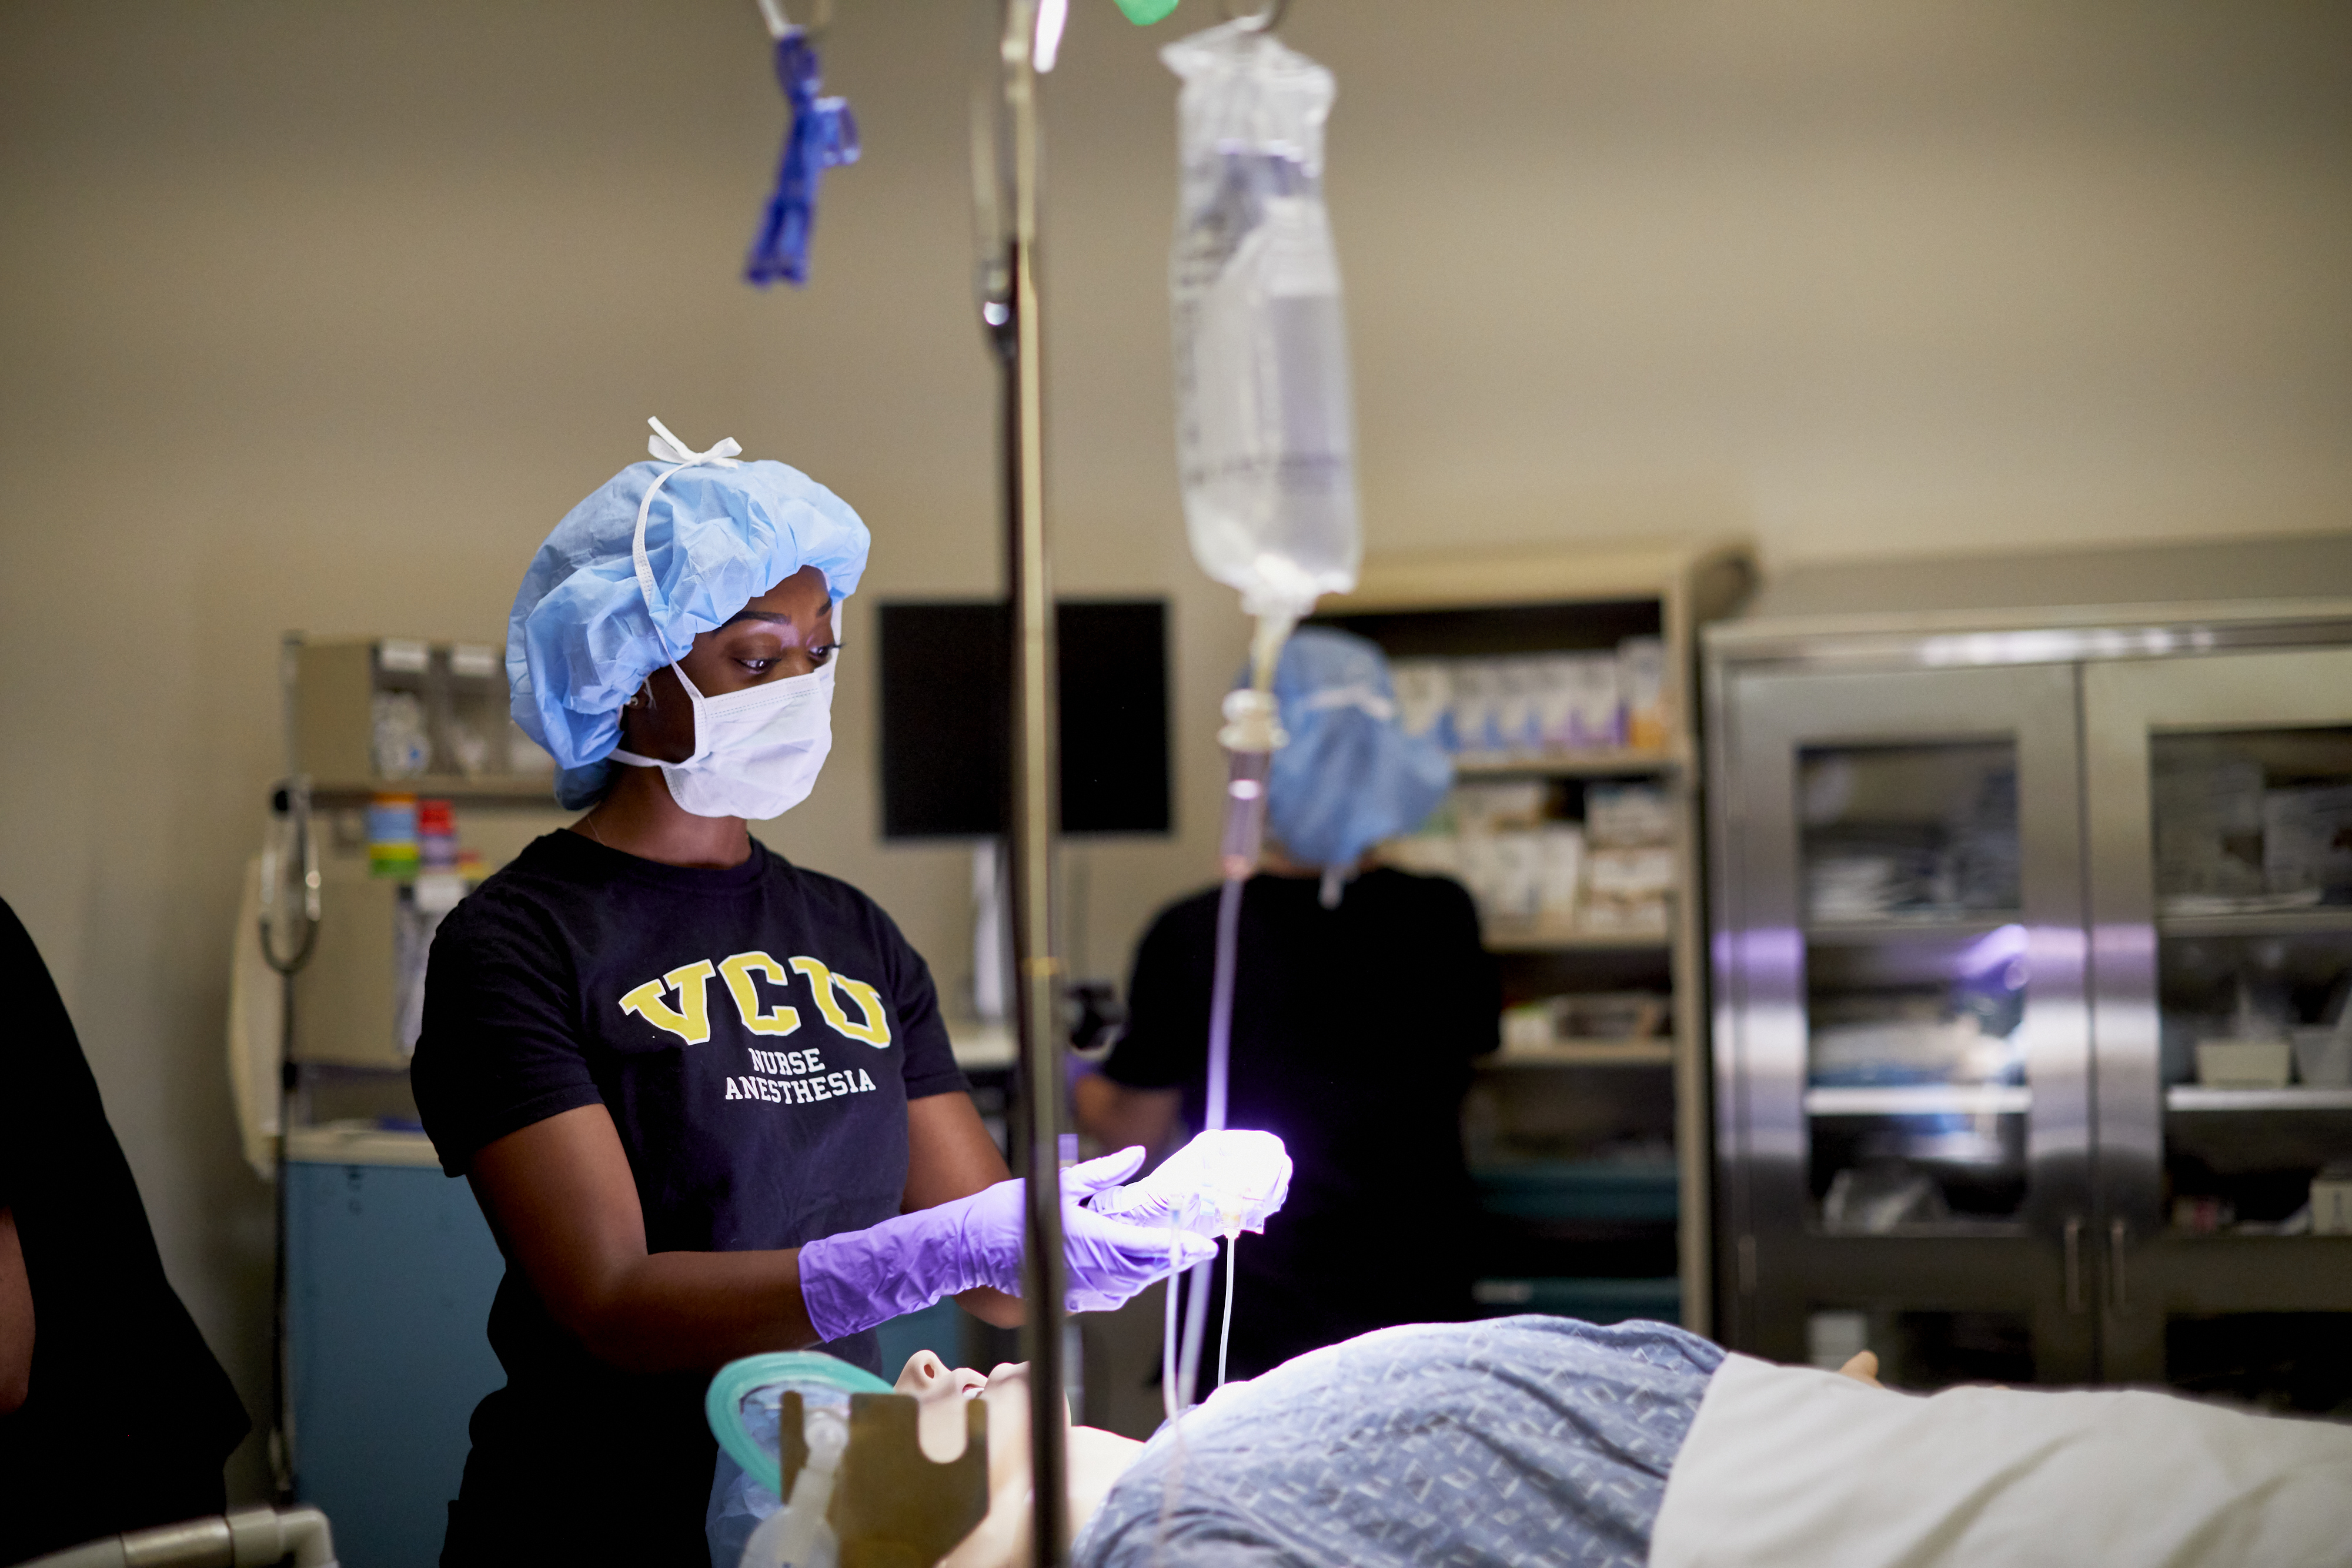 Black female nurse wearing VCU Nurse Anesthesia shirt practicing anesthesia techniques on simulation mannequin.